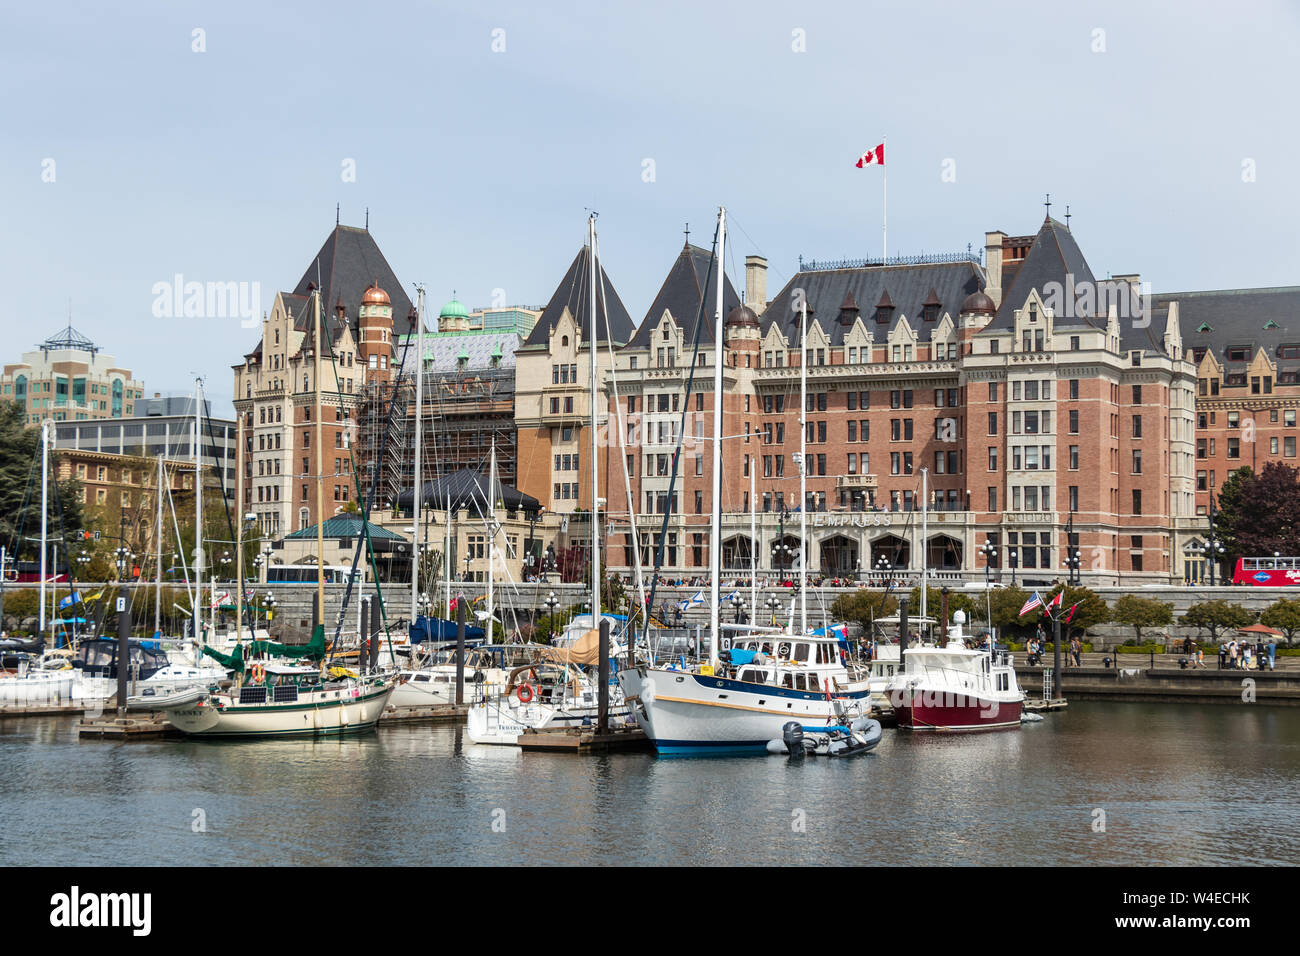 Victoria, BC boat marina seen with The Fairmont Empress hotel in the background. Stock Photo